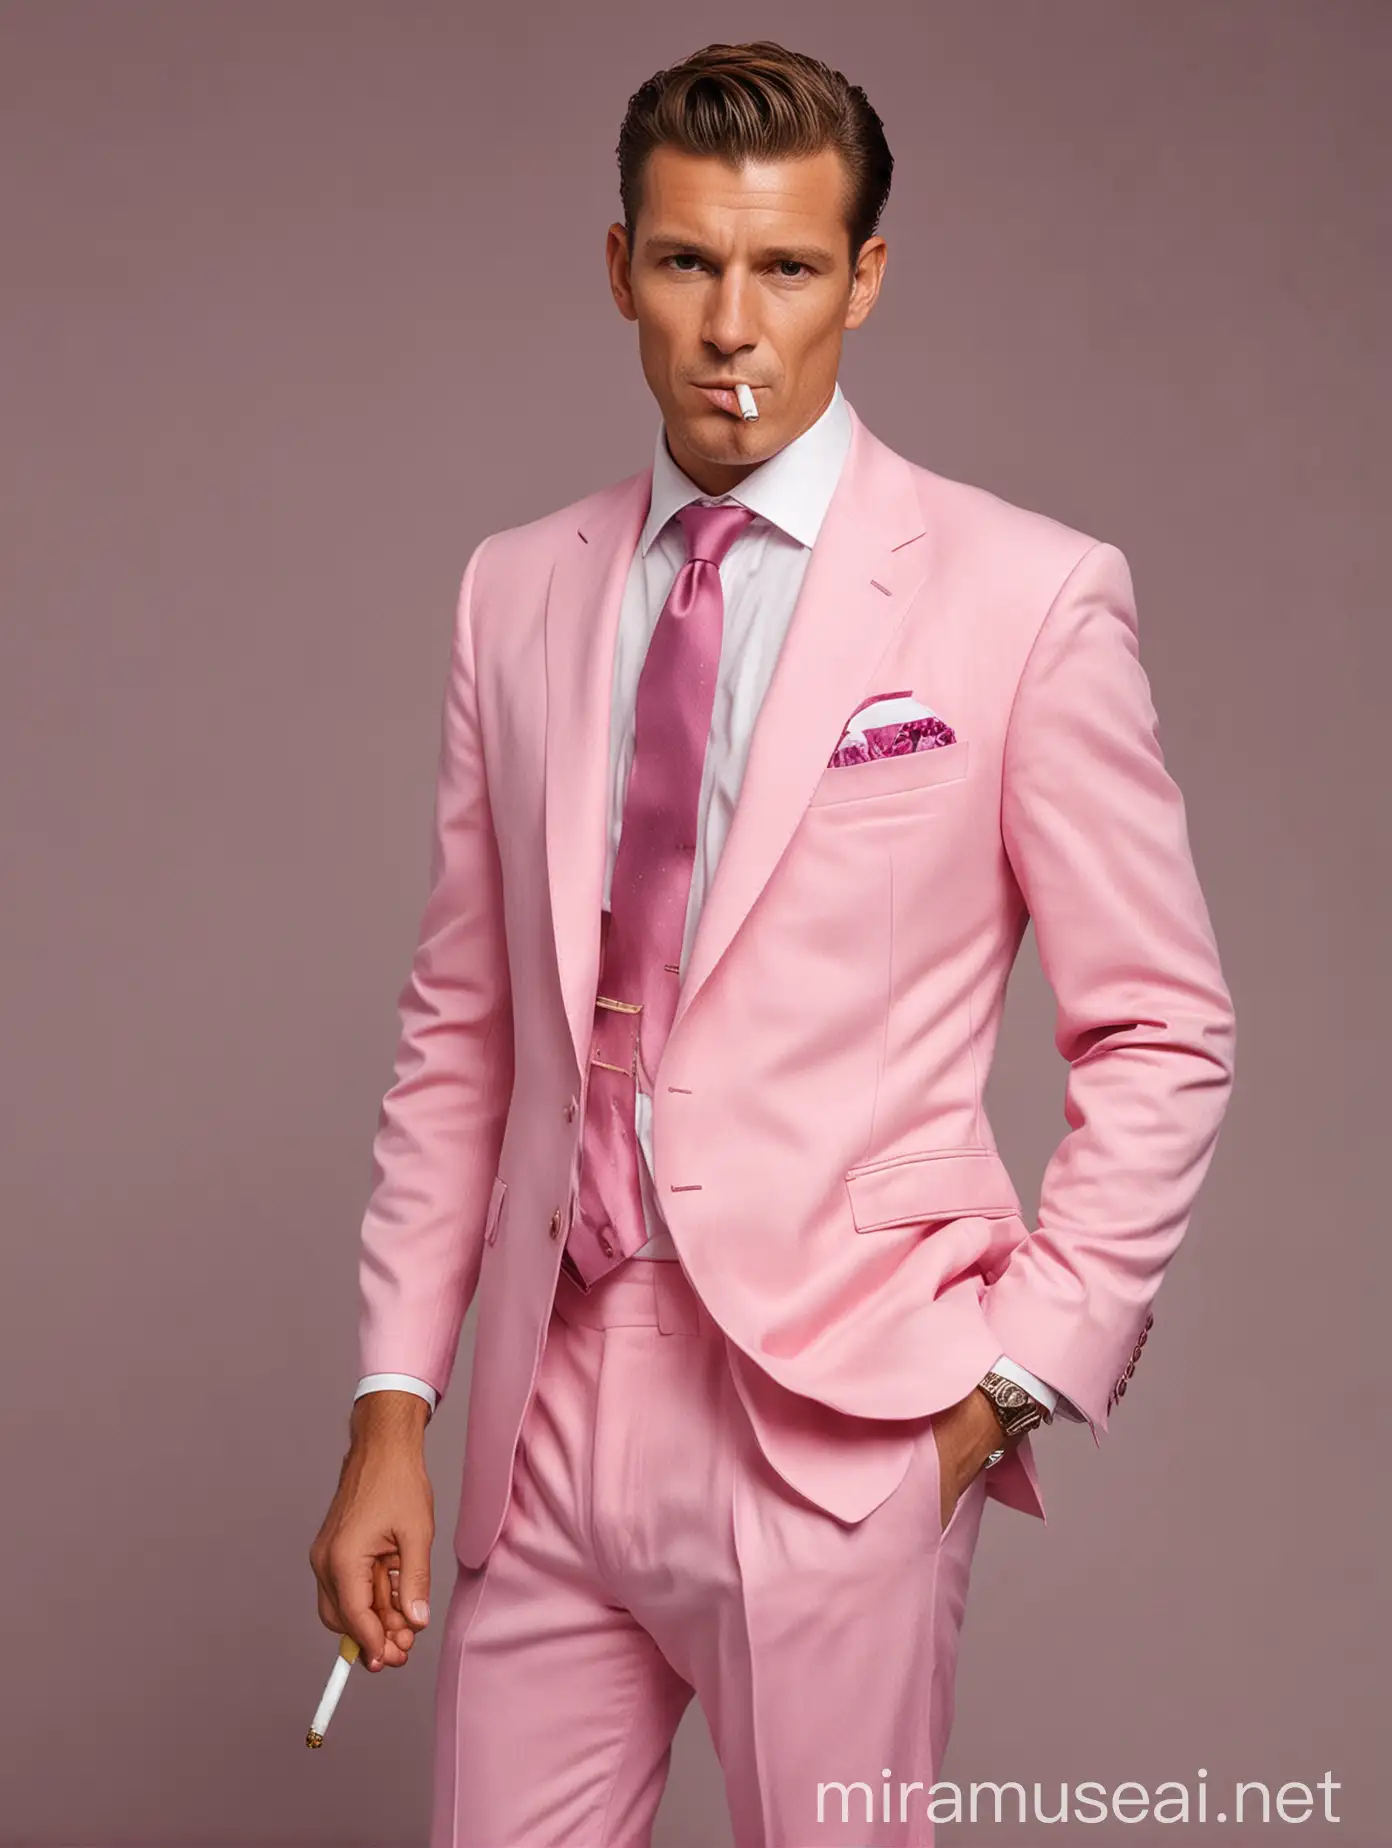 Stylish Man in Dark Pink Suit Holding a Cigarette